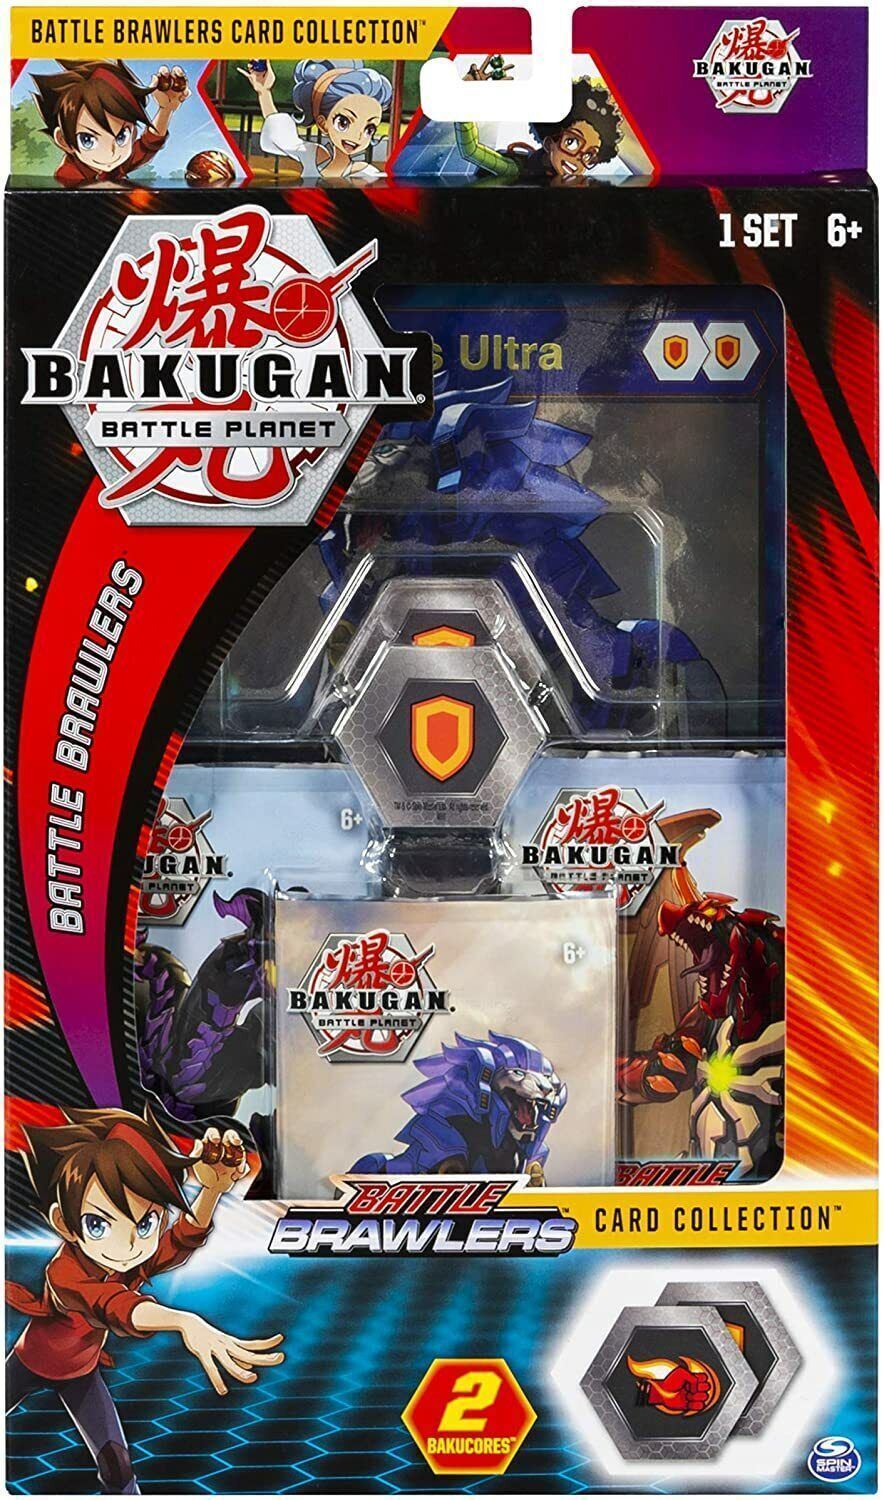 Bakugan - Deluxe Battle Brawlers Card Collection - Hydorous TCG 2 Player NEW - $29.99